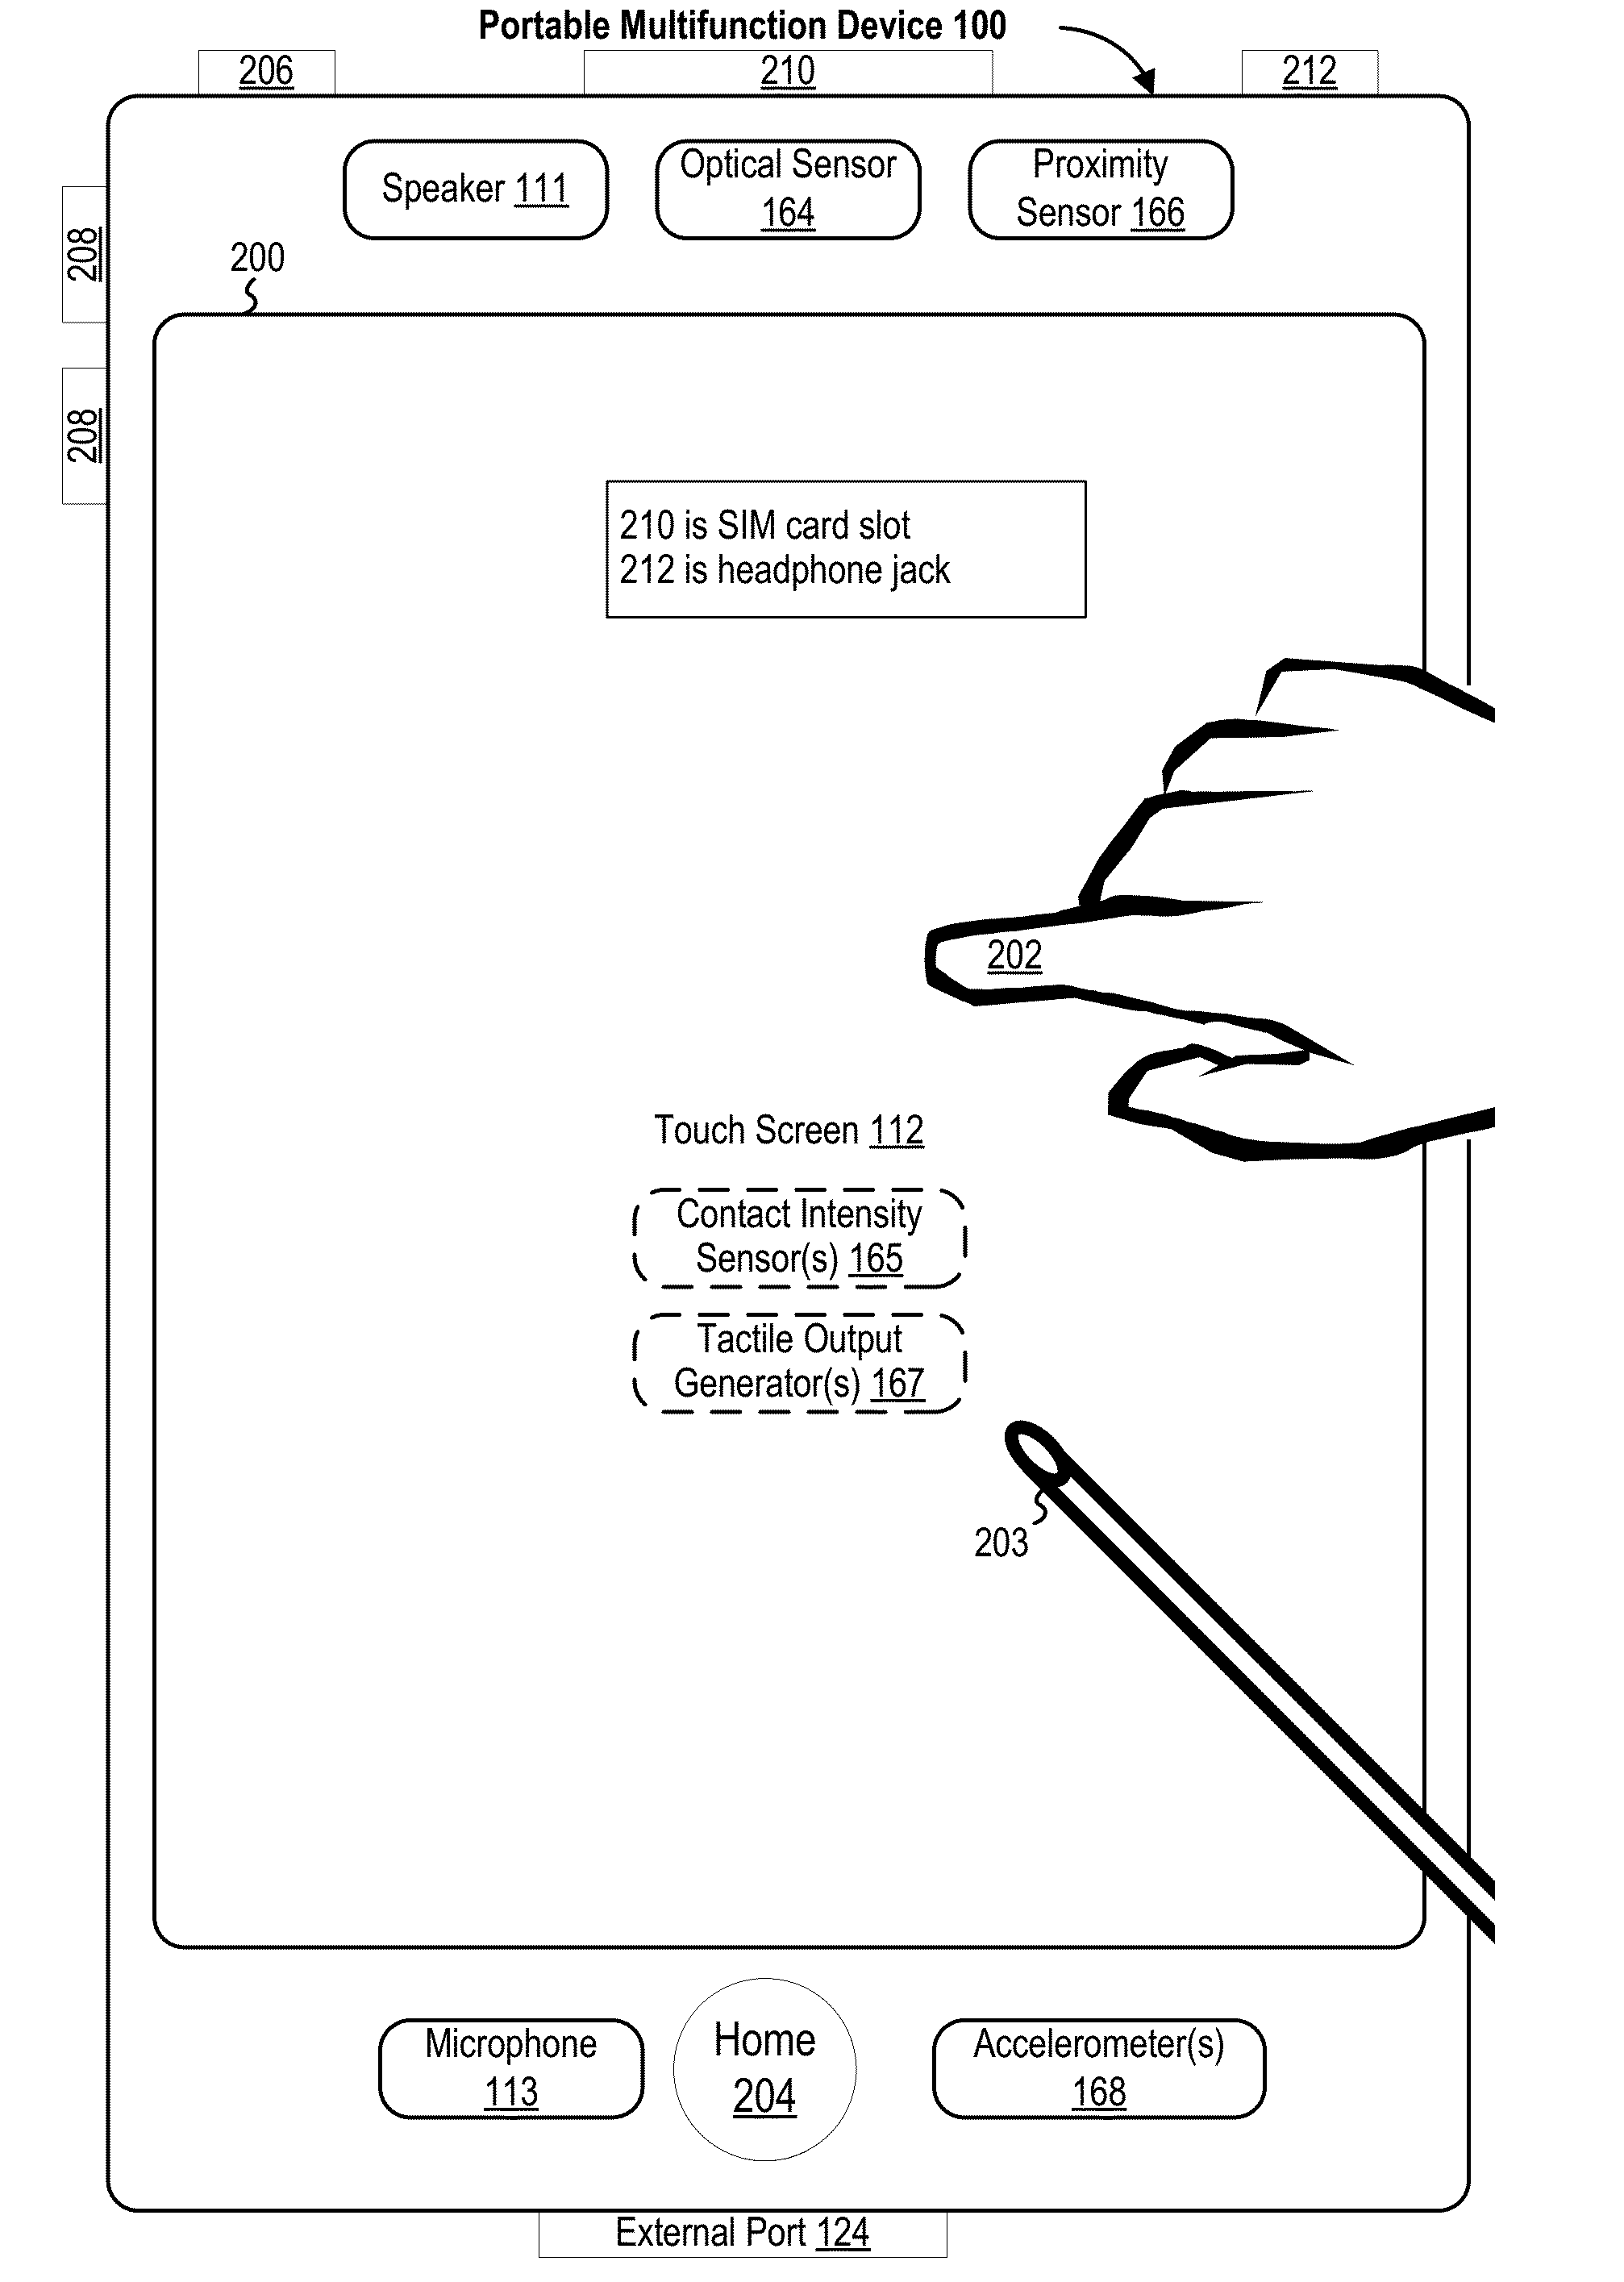 Device configuration user interface